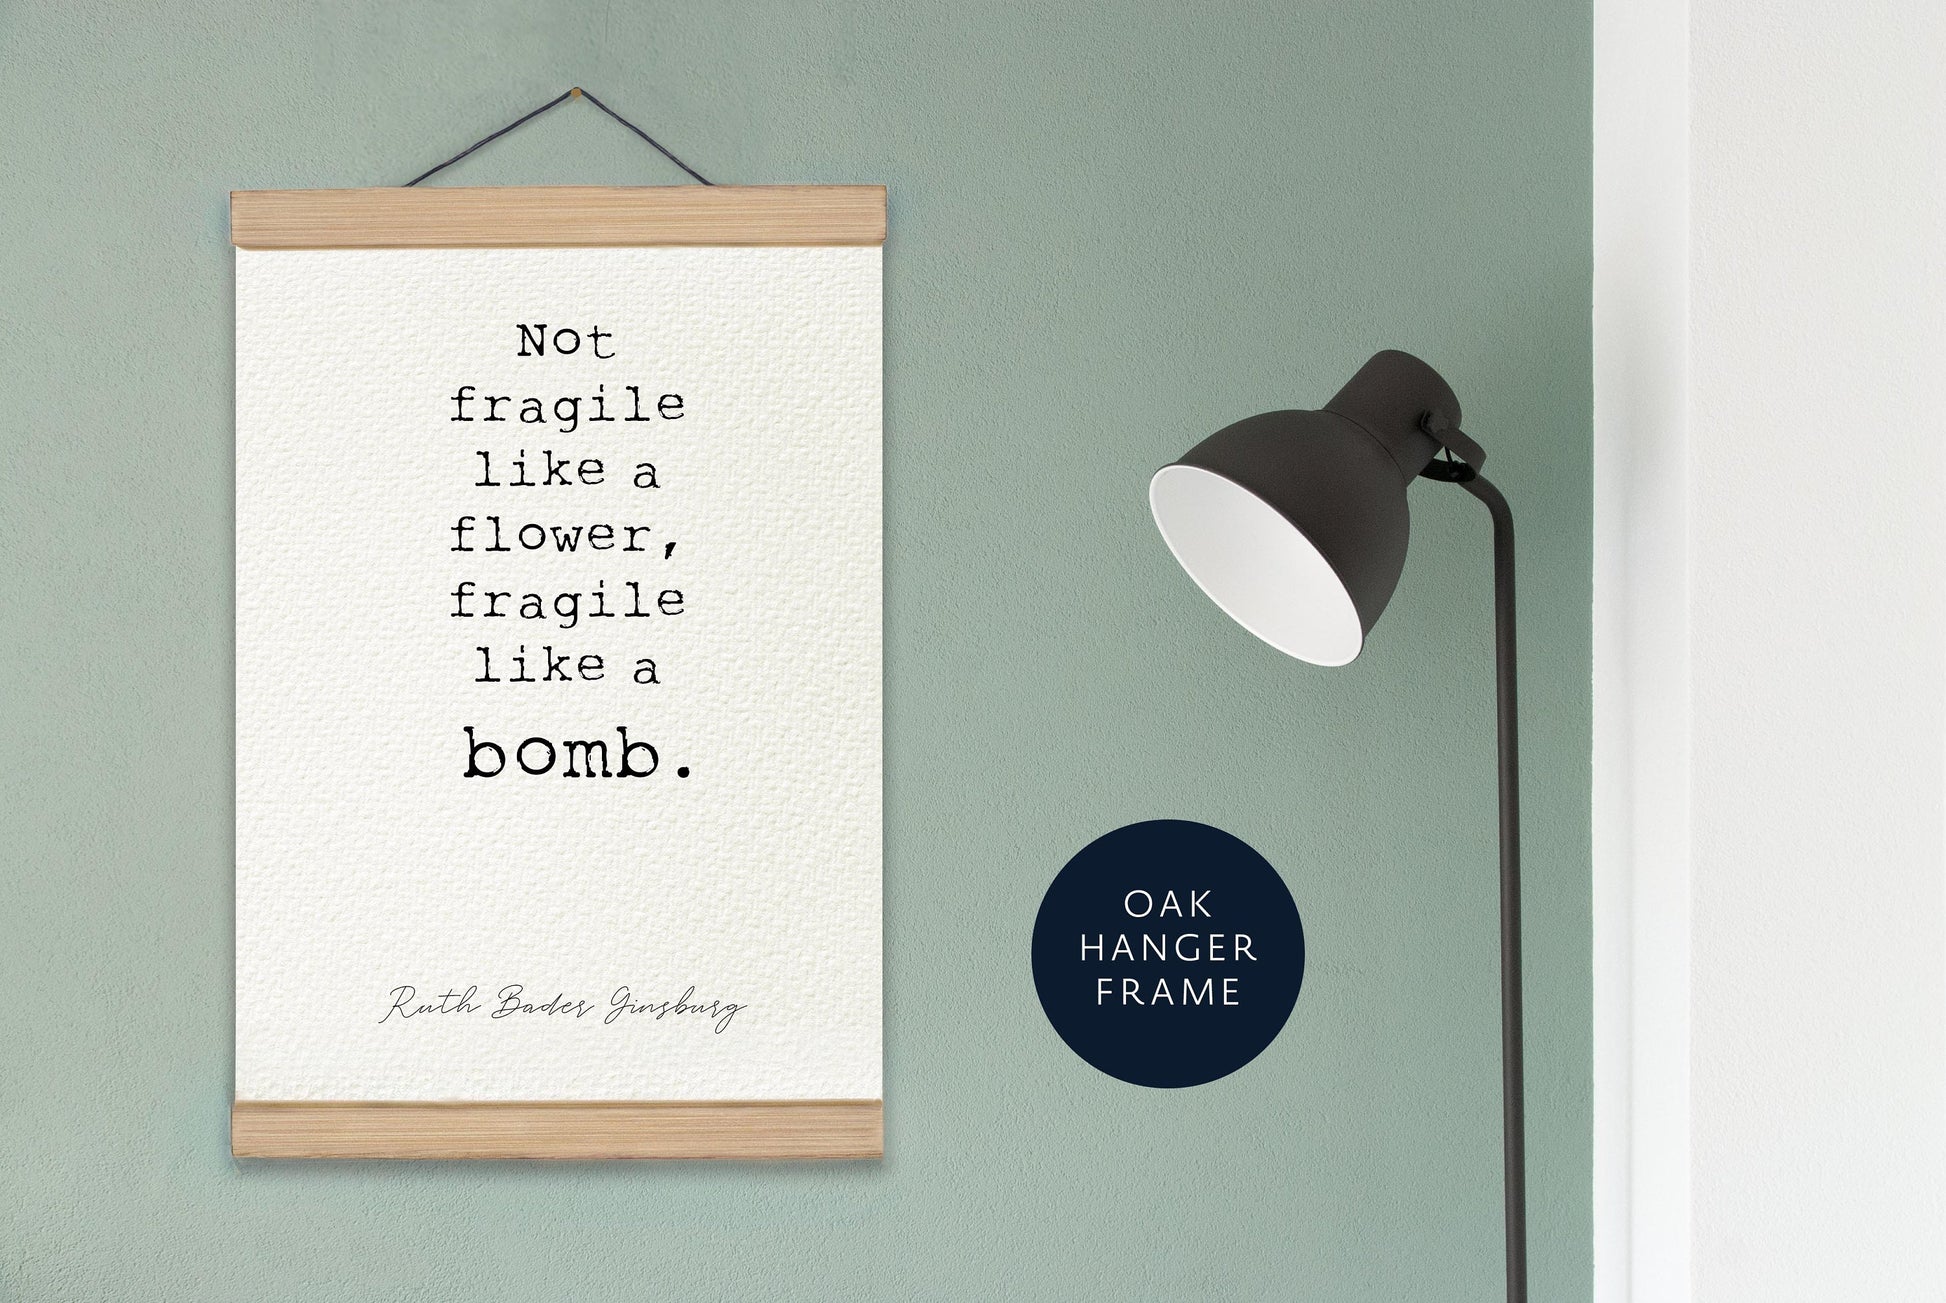 Feminist Quotes Poster - Ruth Bader Ginsburg - Strong Women - Fragile like a bomb print framed - home decor - gifts for women